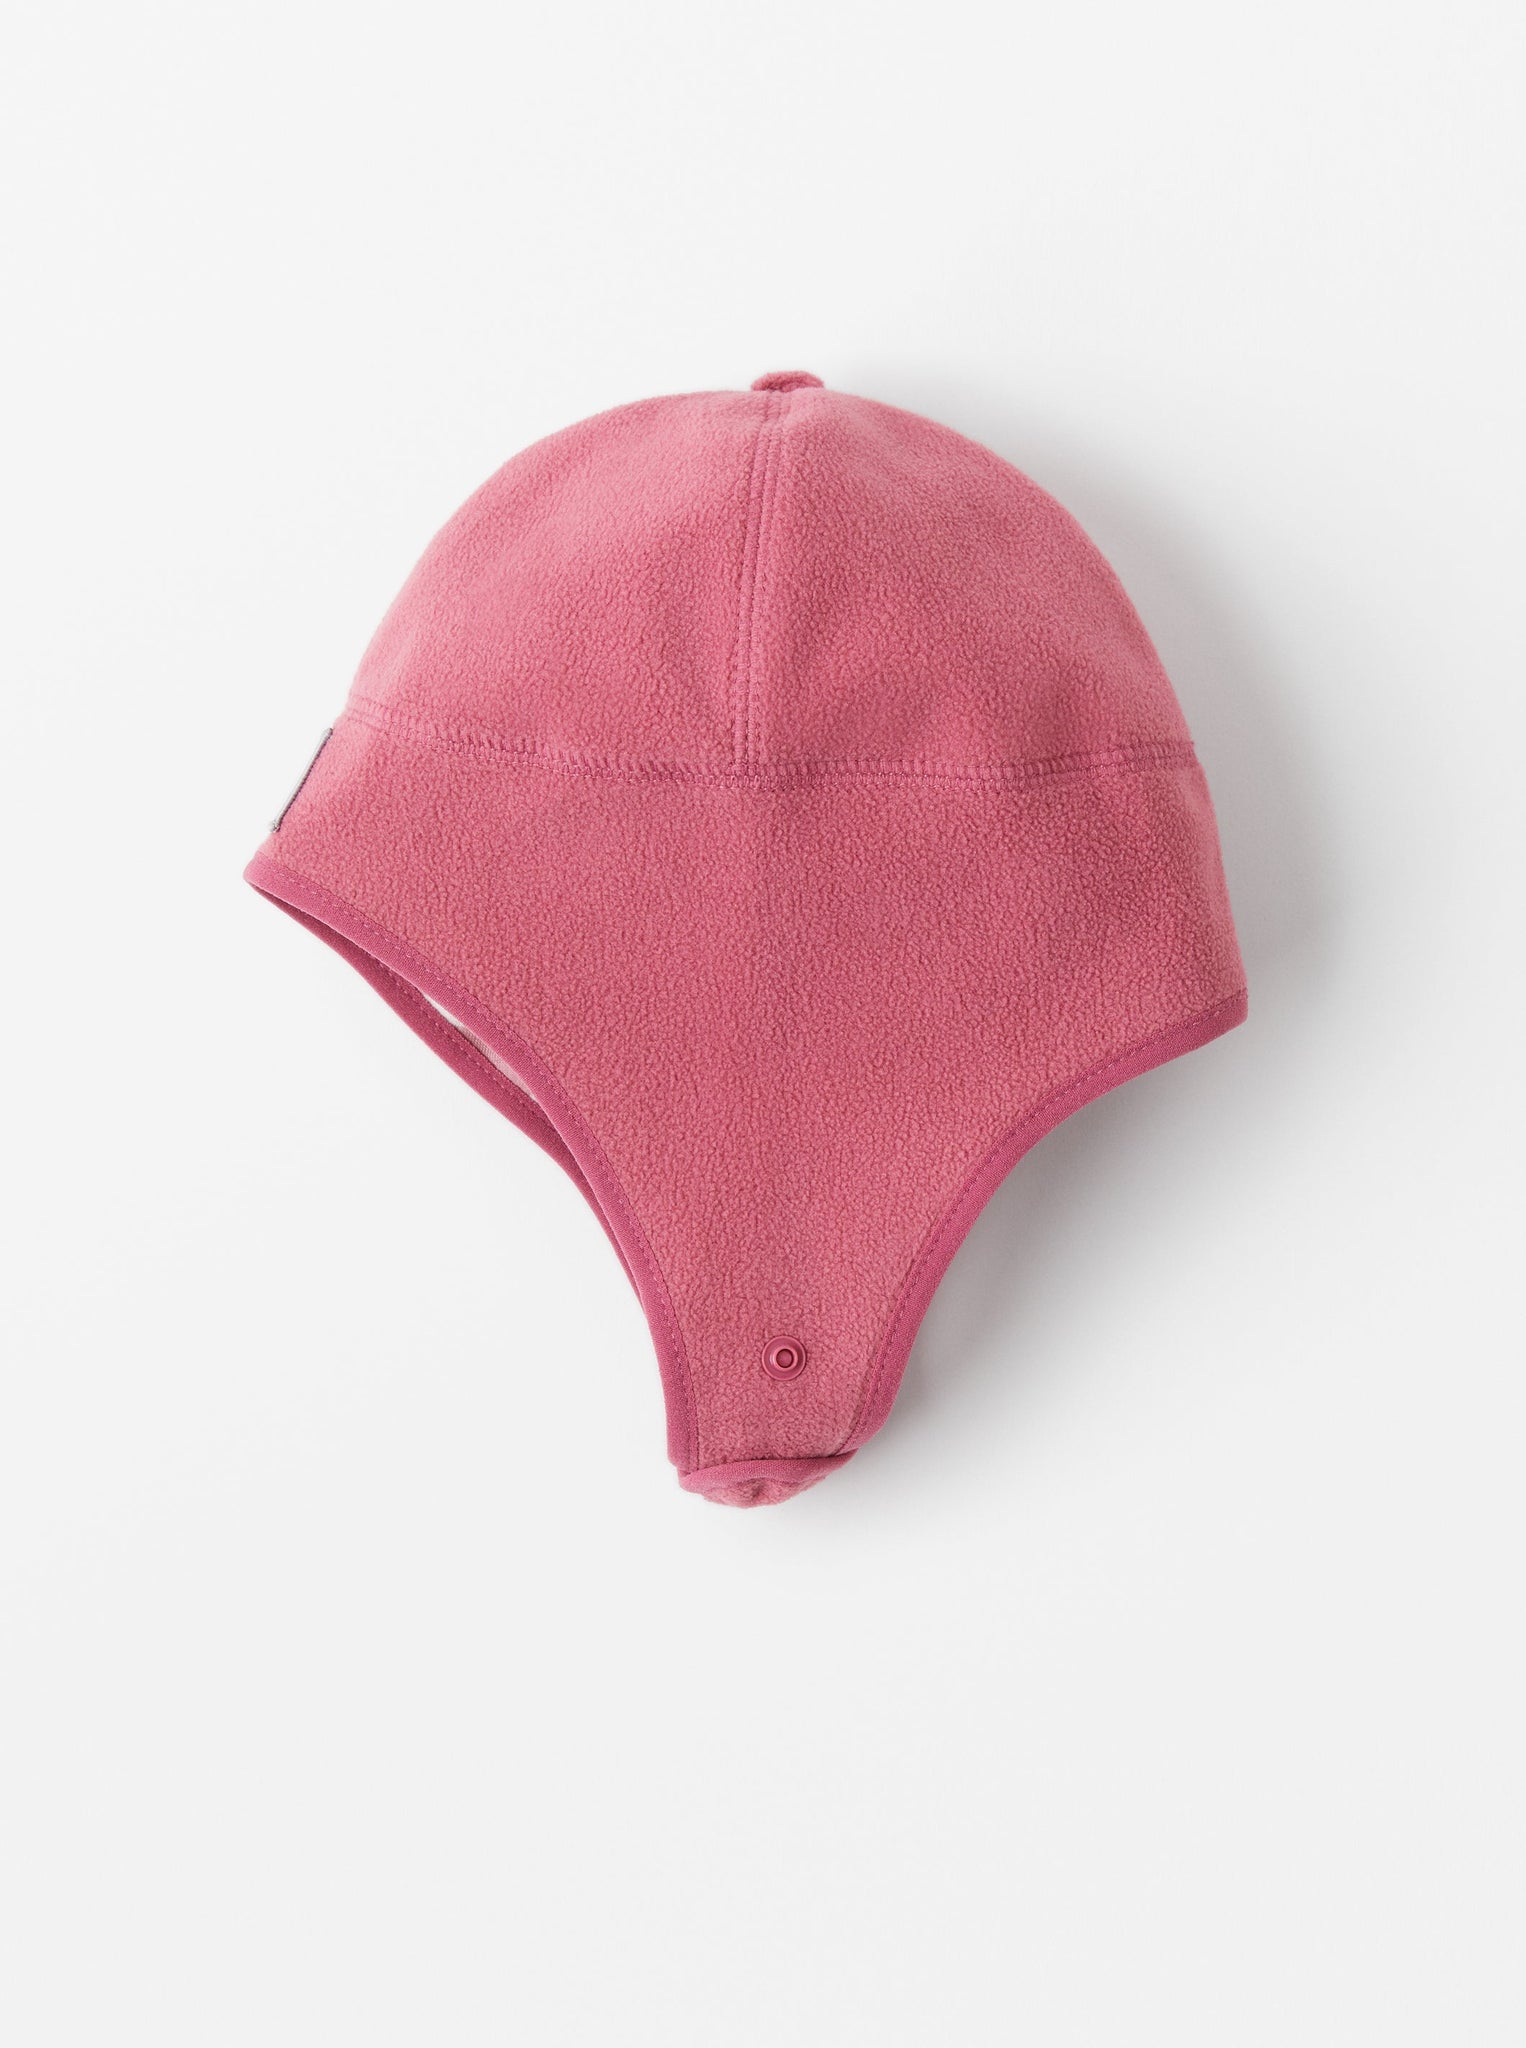 Pink Windproof Baby Hat from the Polarn O. Pyret kidswear collection. Made using ethically sourced materials.